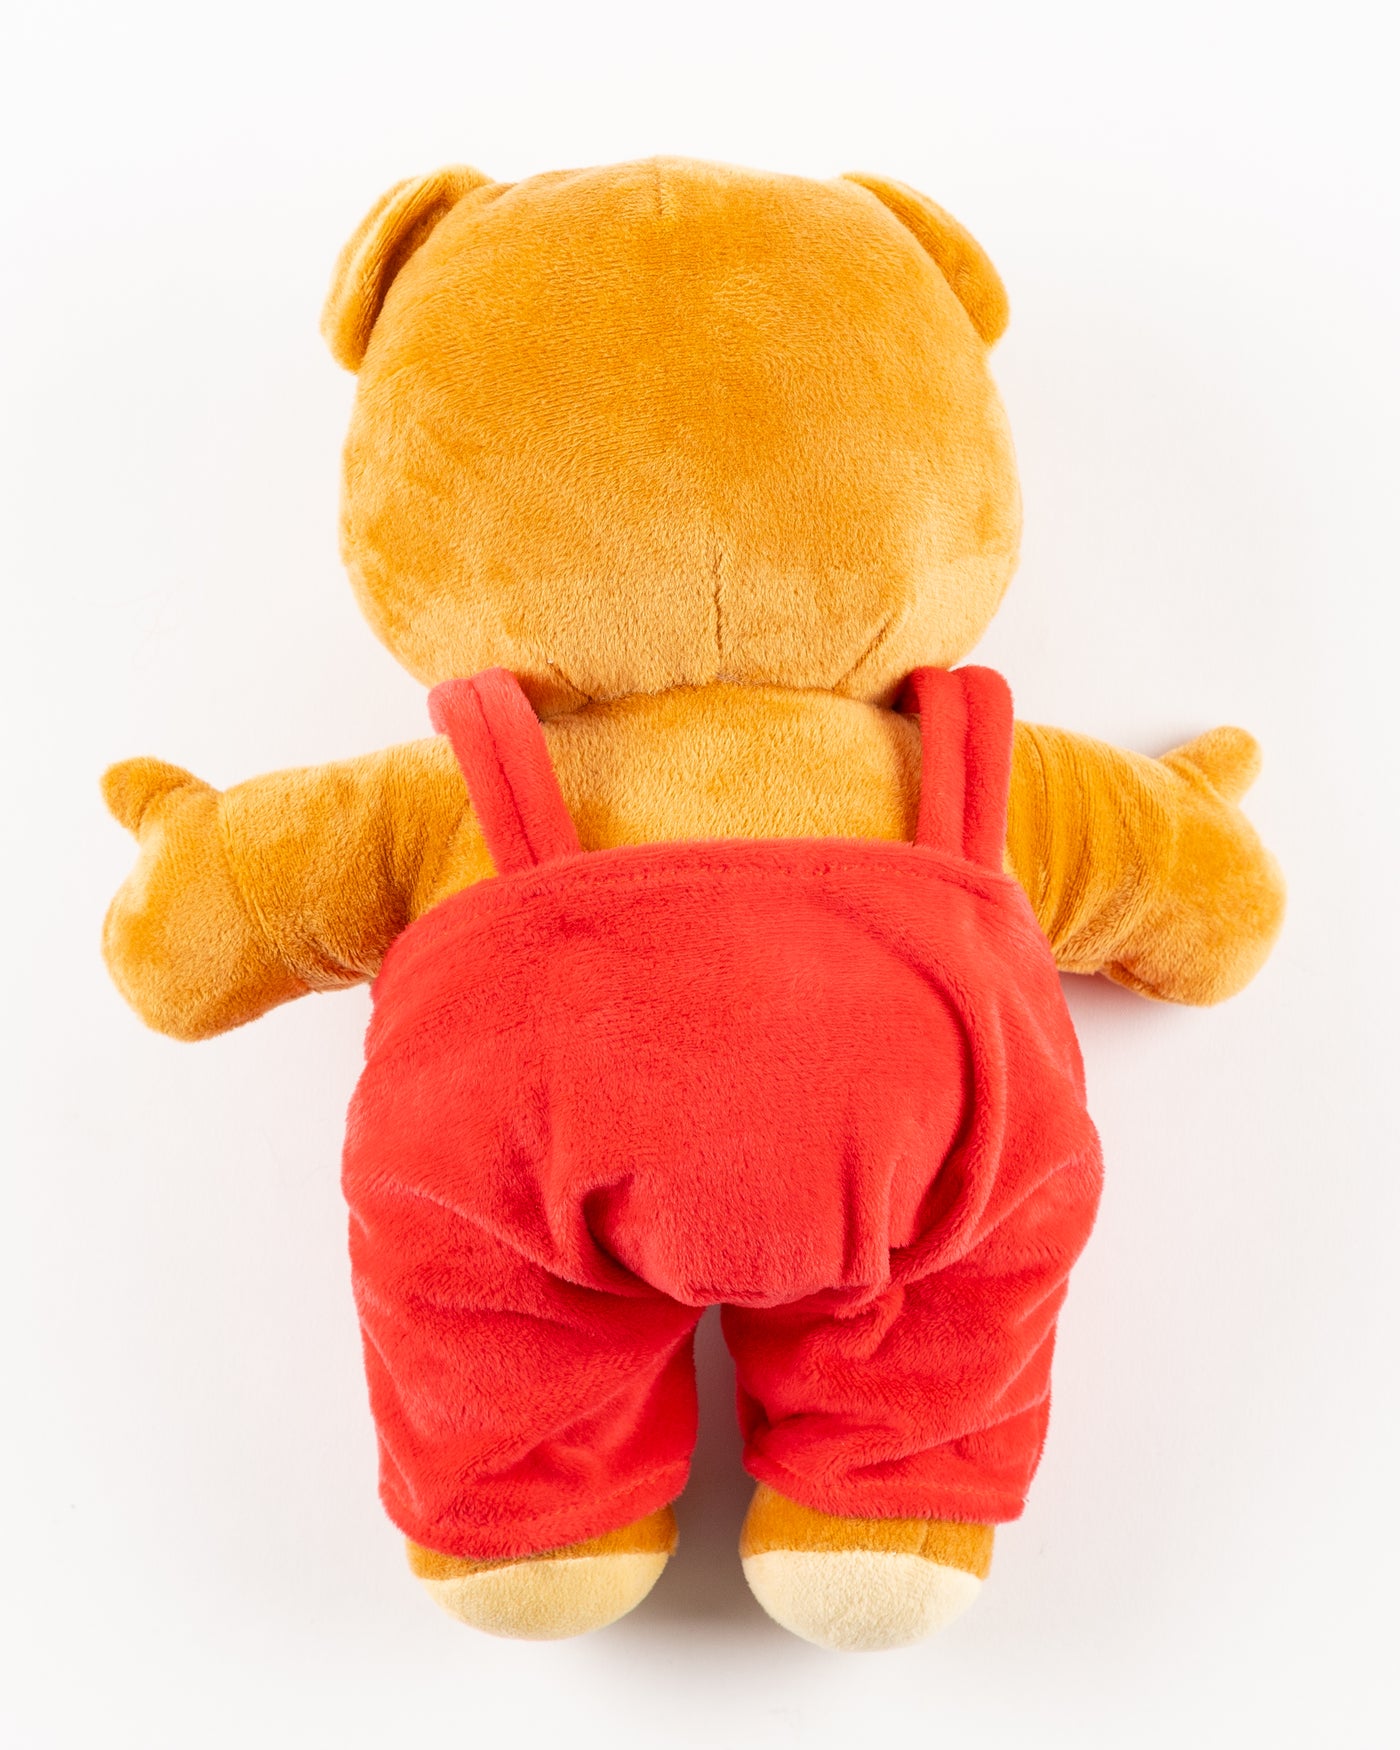 plush bear with red overalls with Chicago Blackhawks primary logo and wordmark embroidered on front - back lay flat